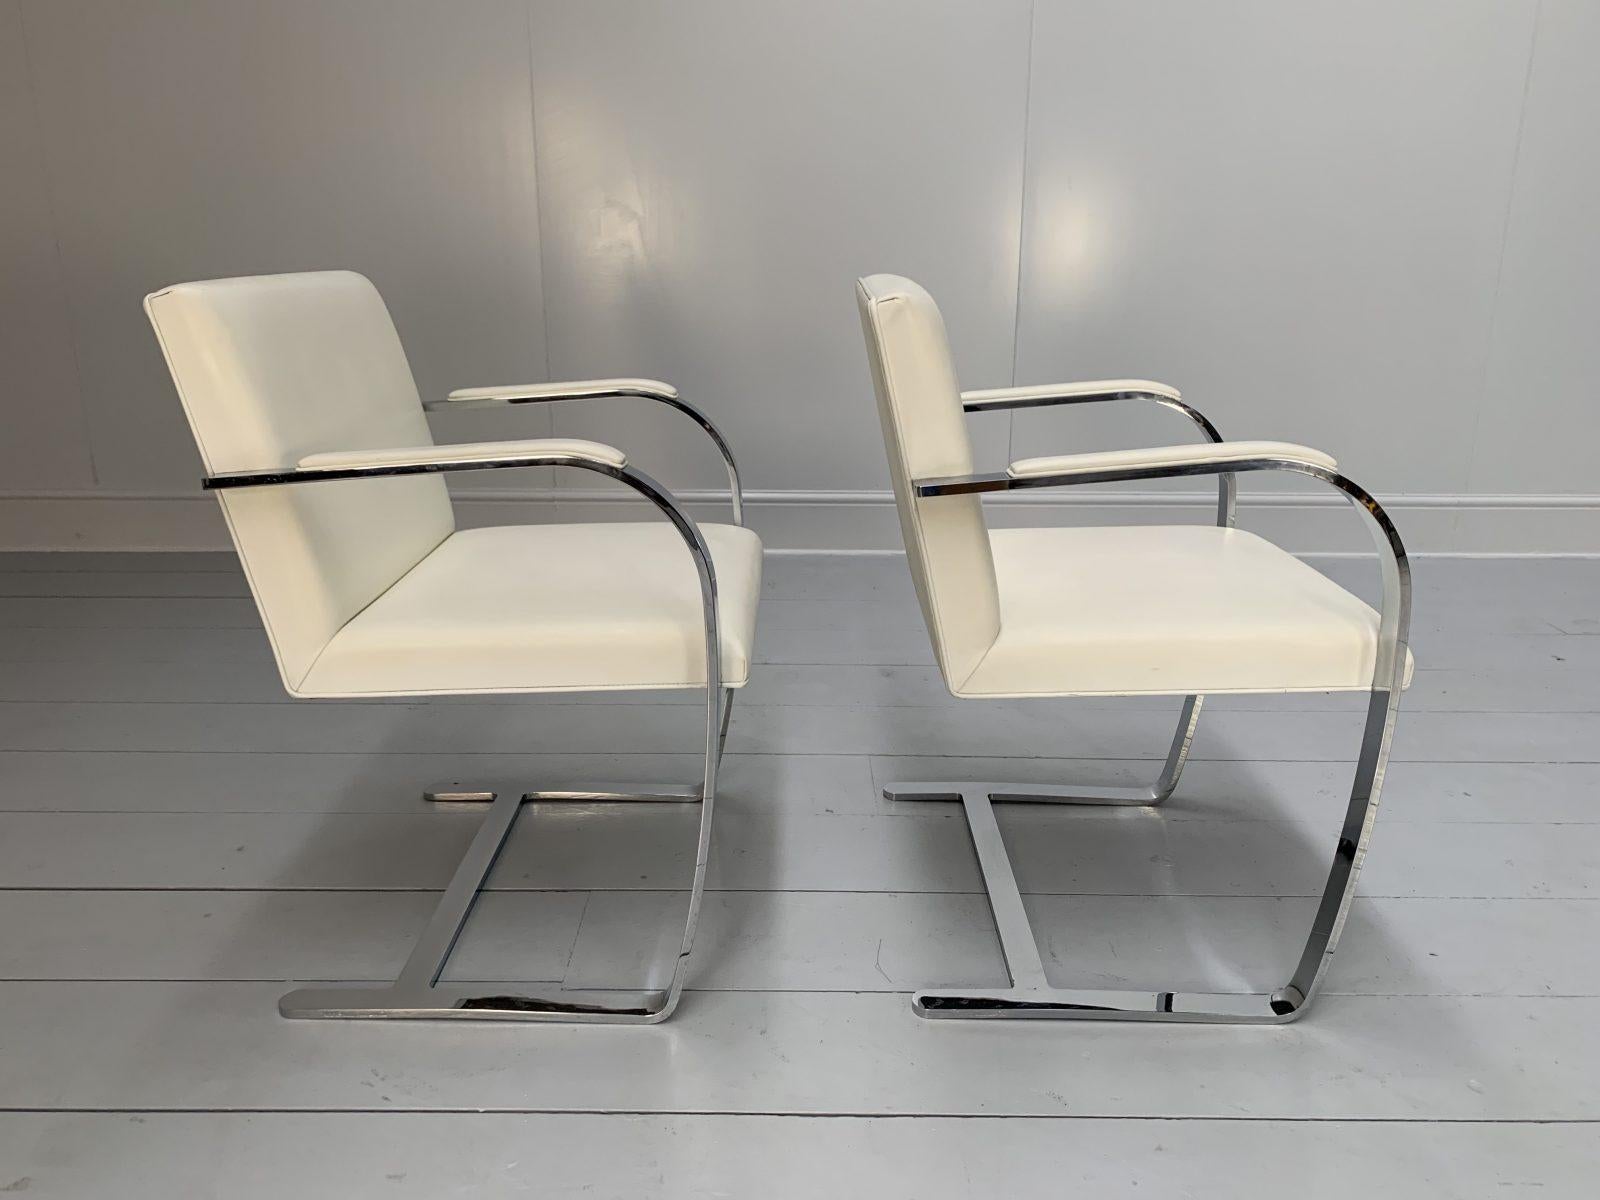 Pair of Knoll Studio “Brno Flat Bar” Armchairs in Chrome & White Leather In Good Condition For Sale In Barrowford, GB